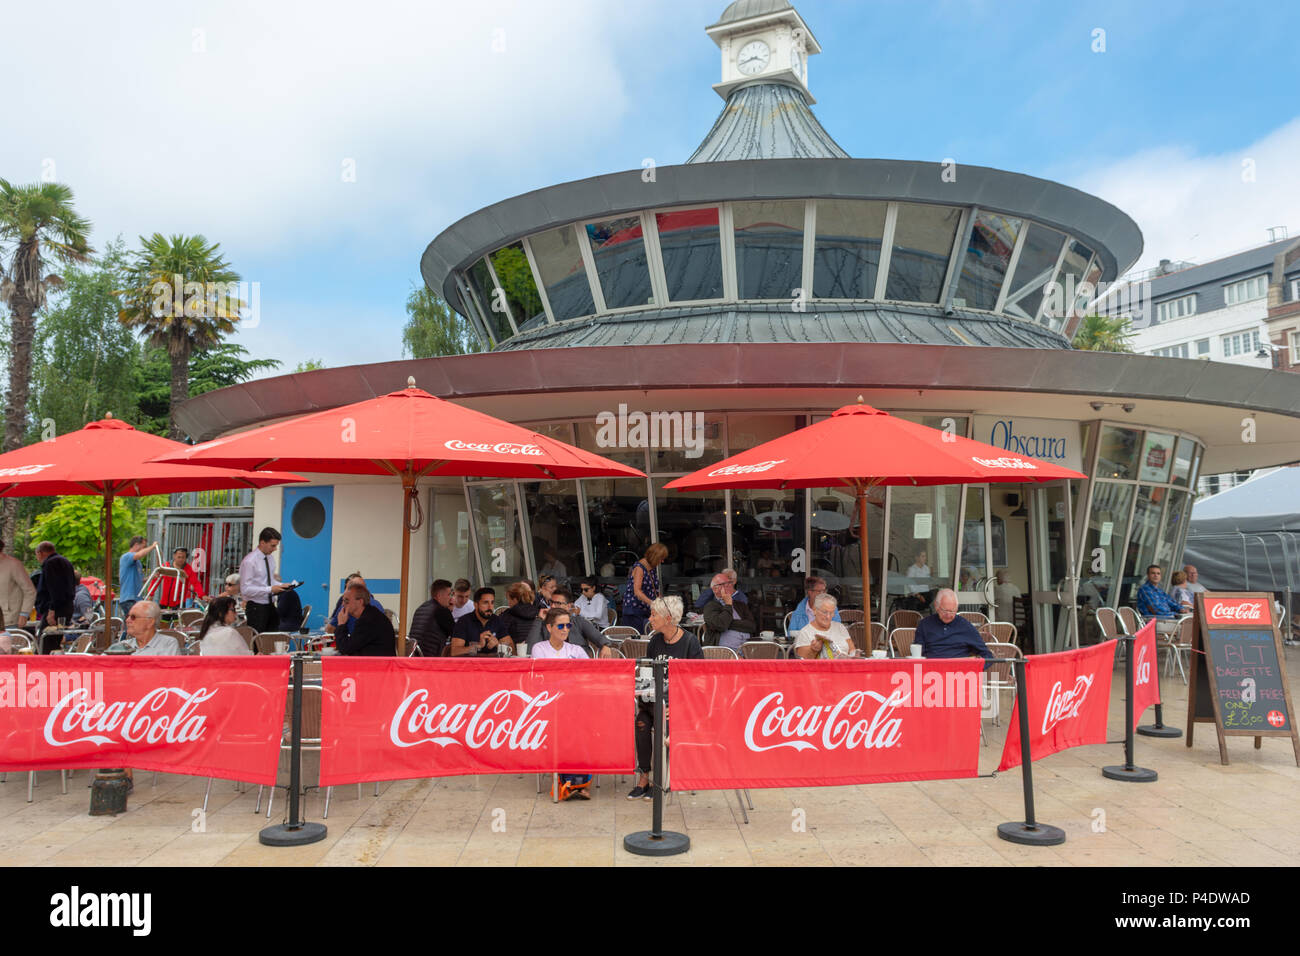 People sitting outside behind Coca-Cola screens at Cafe Obscura in The Square, Bournemouth, Dorset, UK Stock Photo